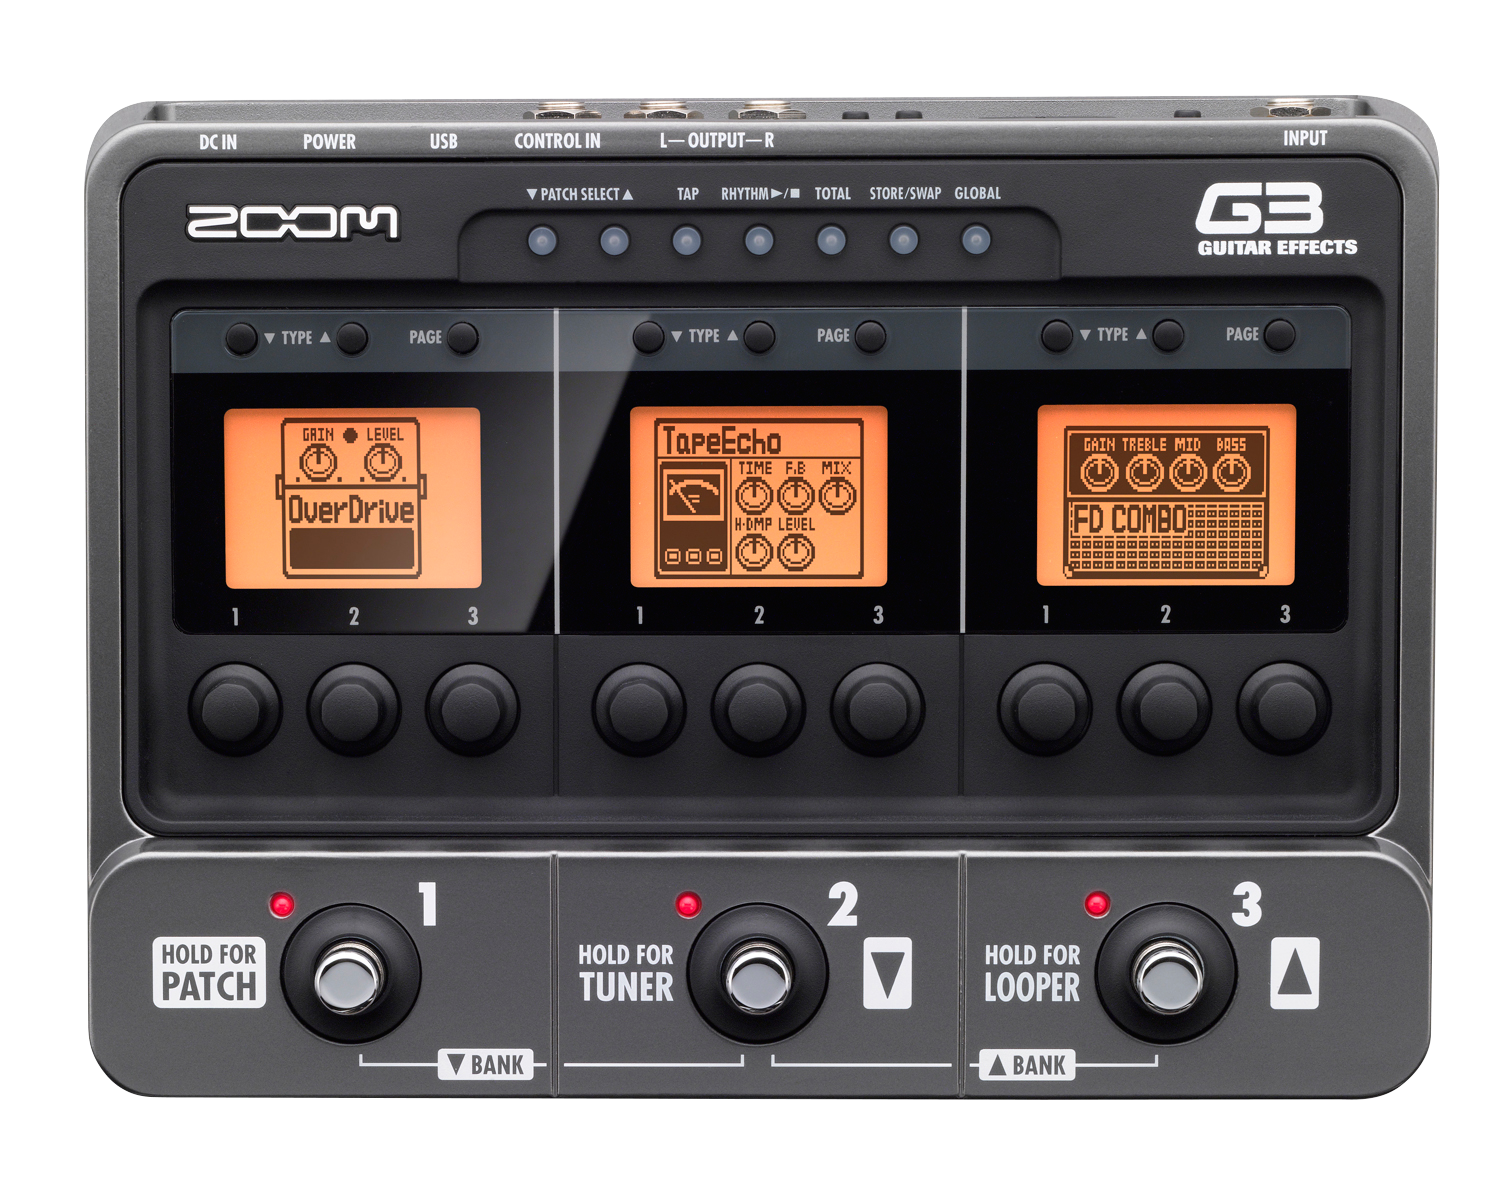 ZOOM THE ZOOM G3 Guitar Effects \u0026 Amp S…